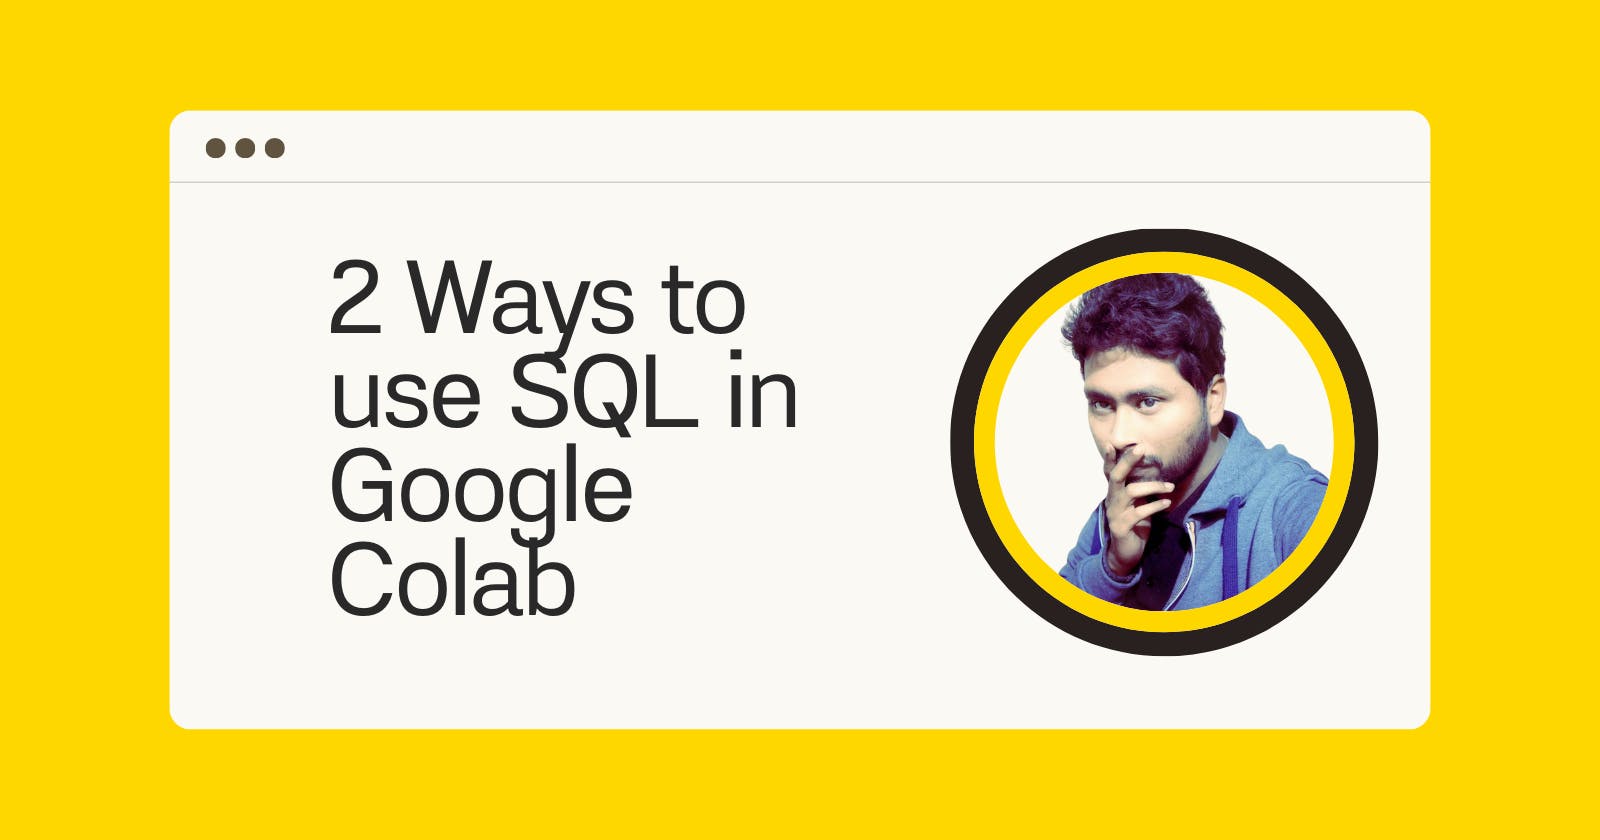 2 Ways to use SQL in Google Colab